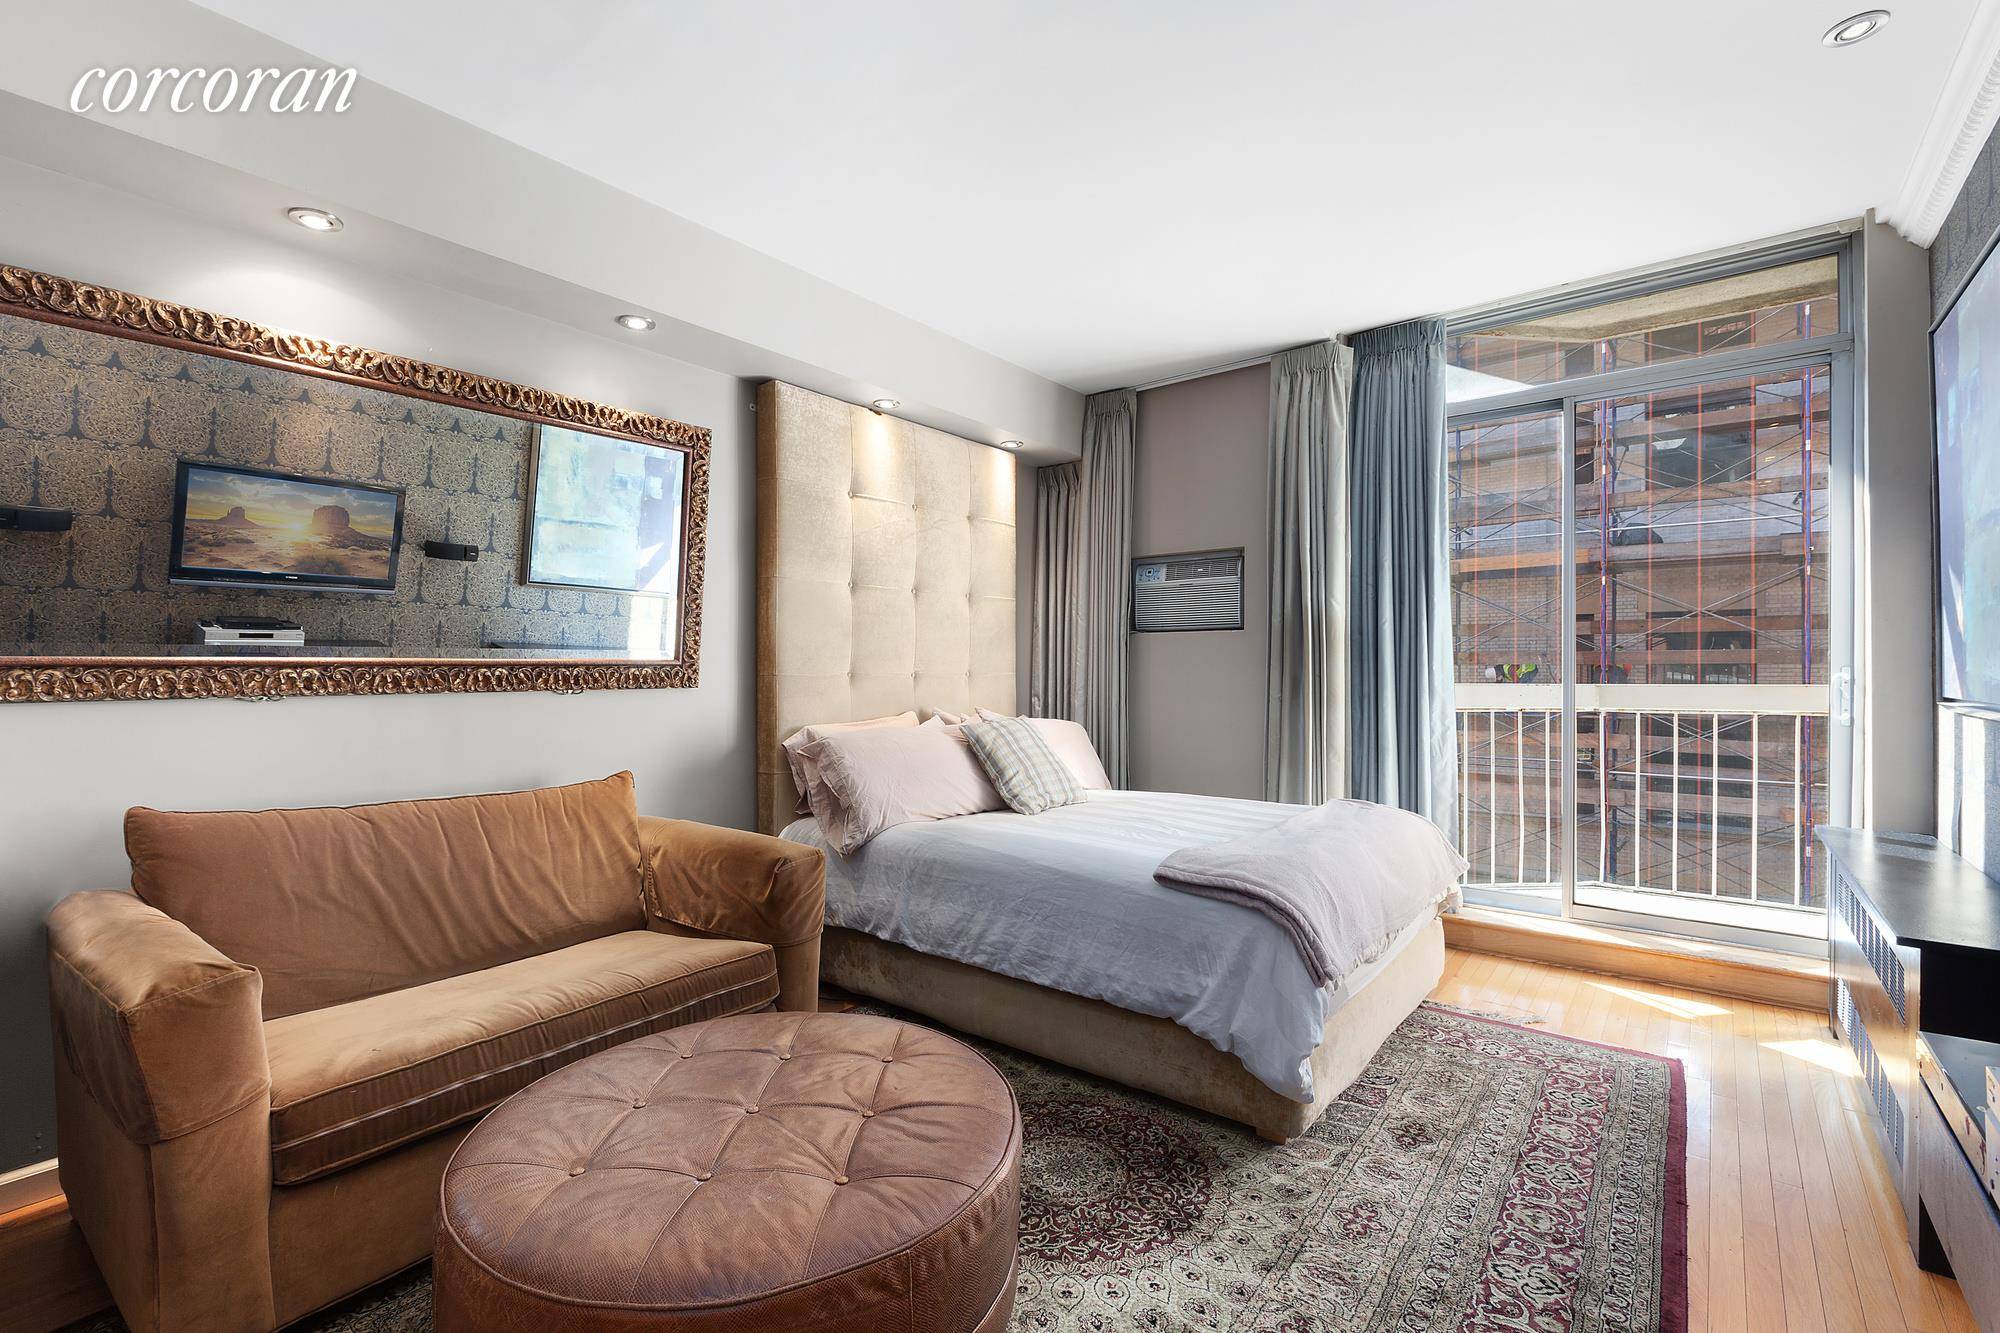 Apartment 3J at 184 Thompson Street is the quintessential exemplification of a mint condition Village studio apartment with outdoor space A nothing more than what you need and nothing less ...